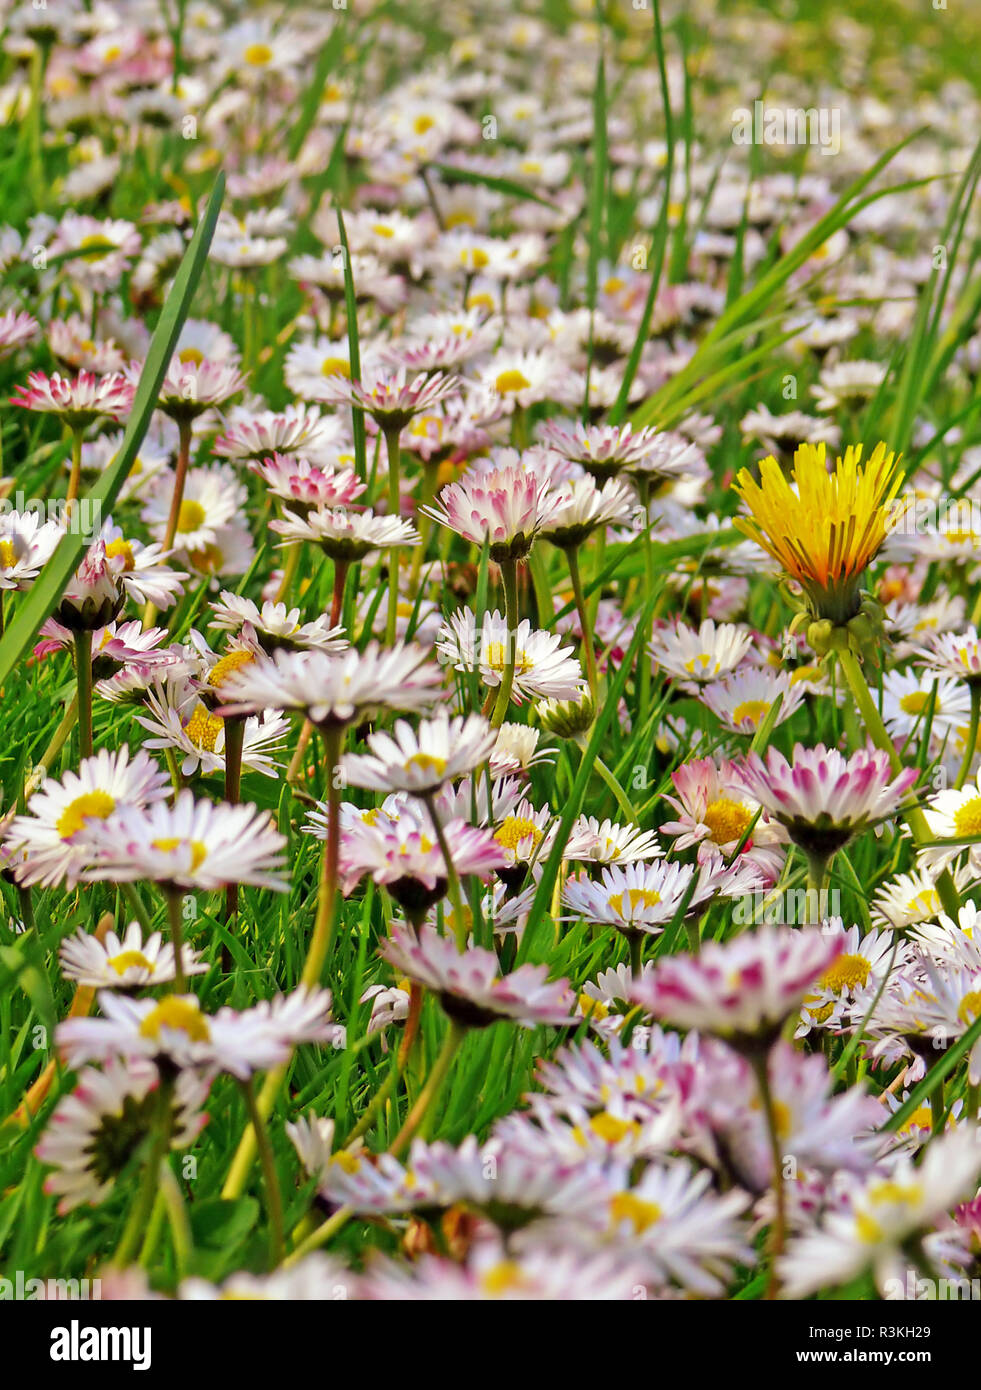 many daisies and a dandelion Stock Photo